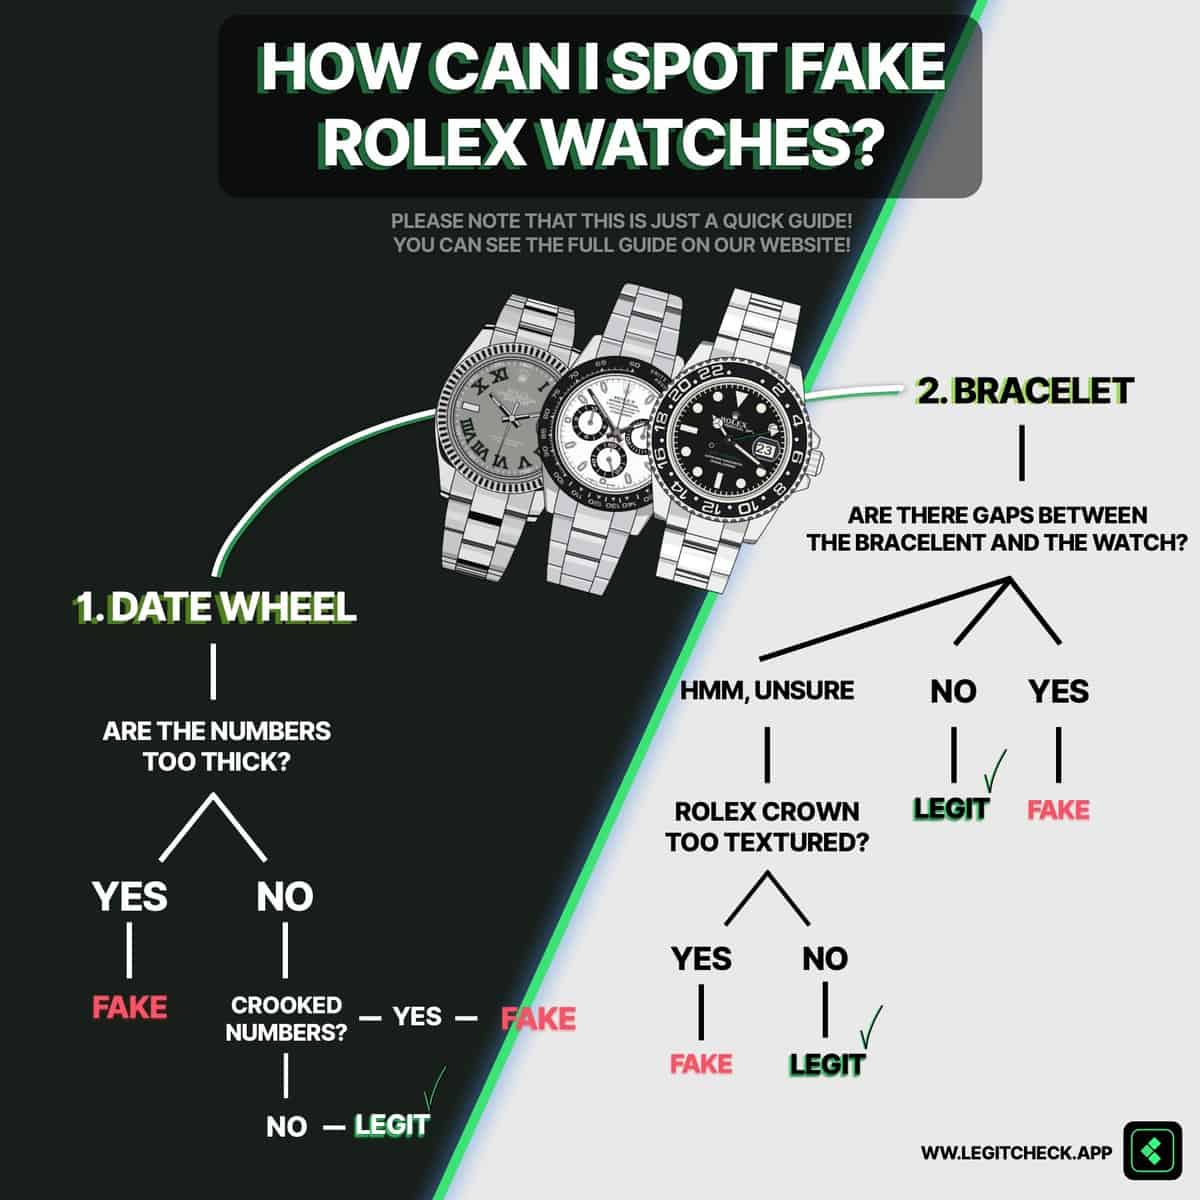 How to Spot a Fake Rolex: The Official Guide 